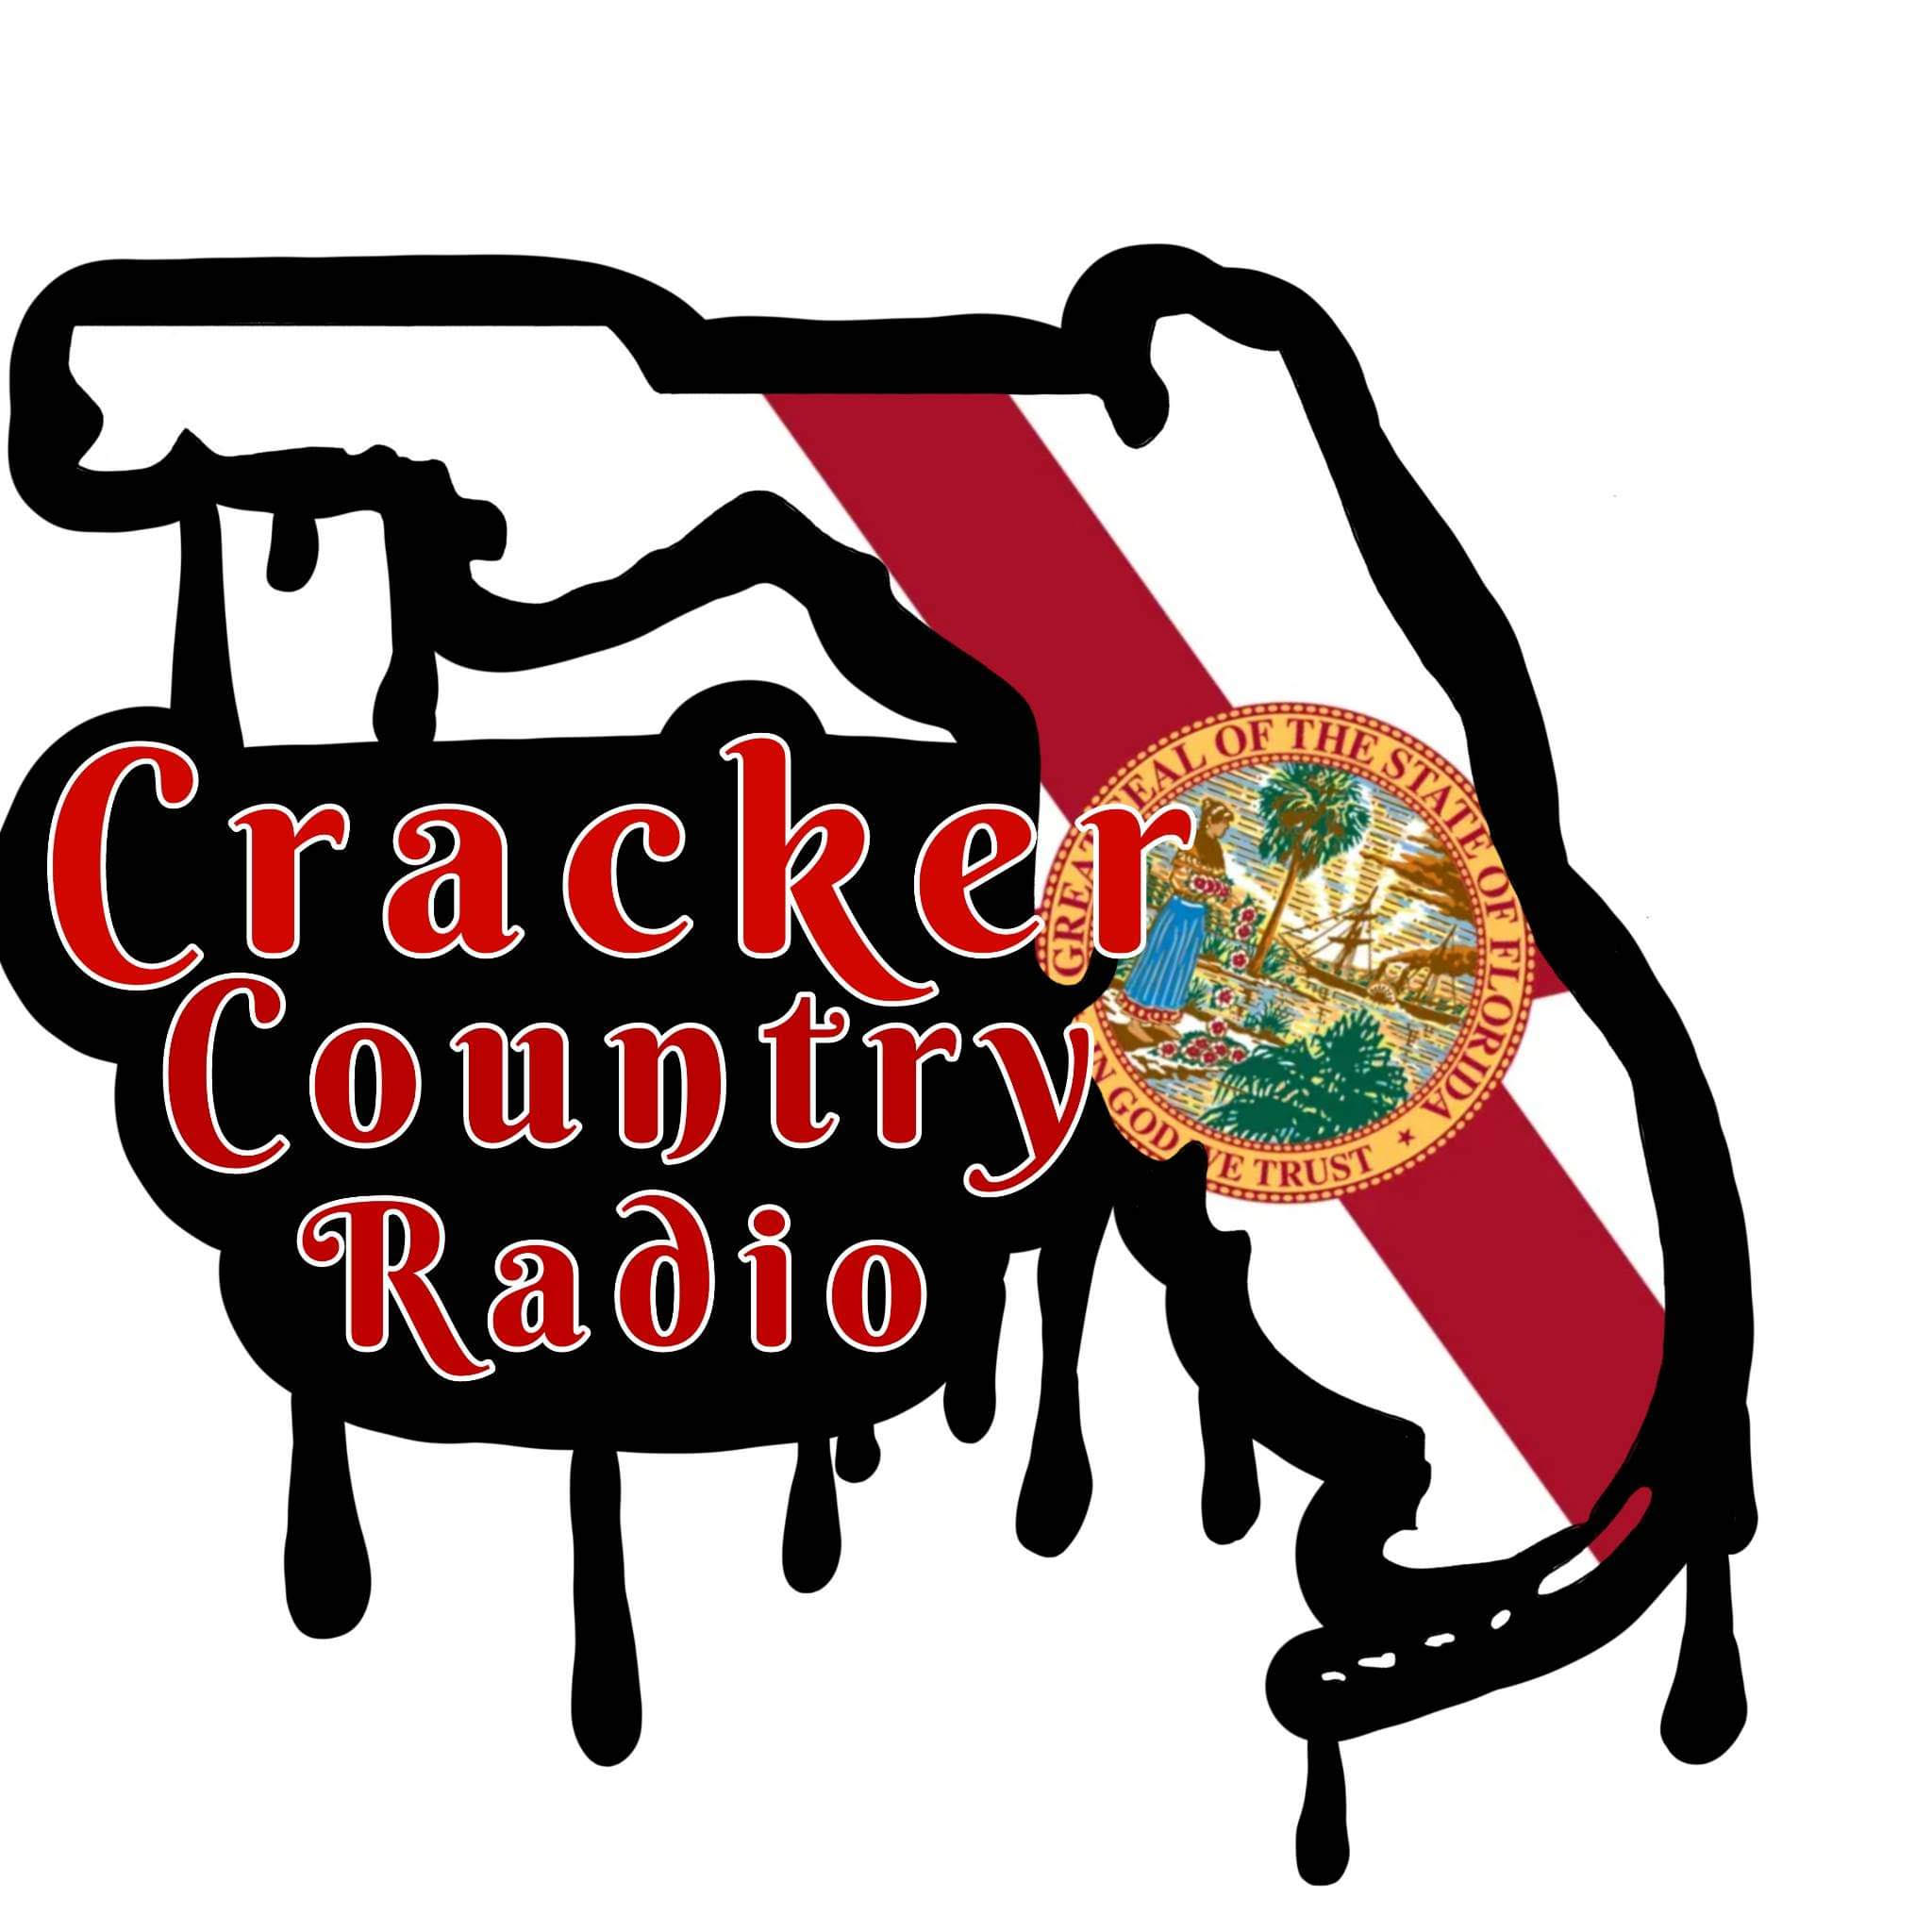 Art for Station ID #3 by Cracker Country Radio